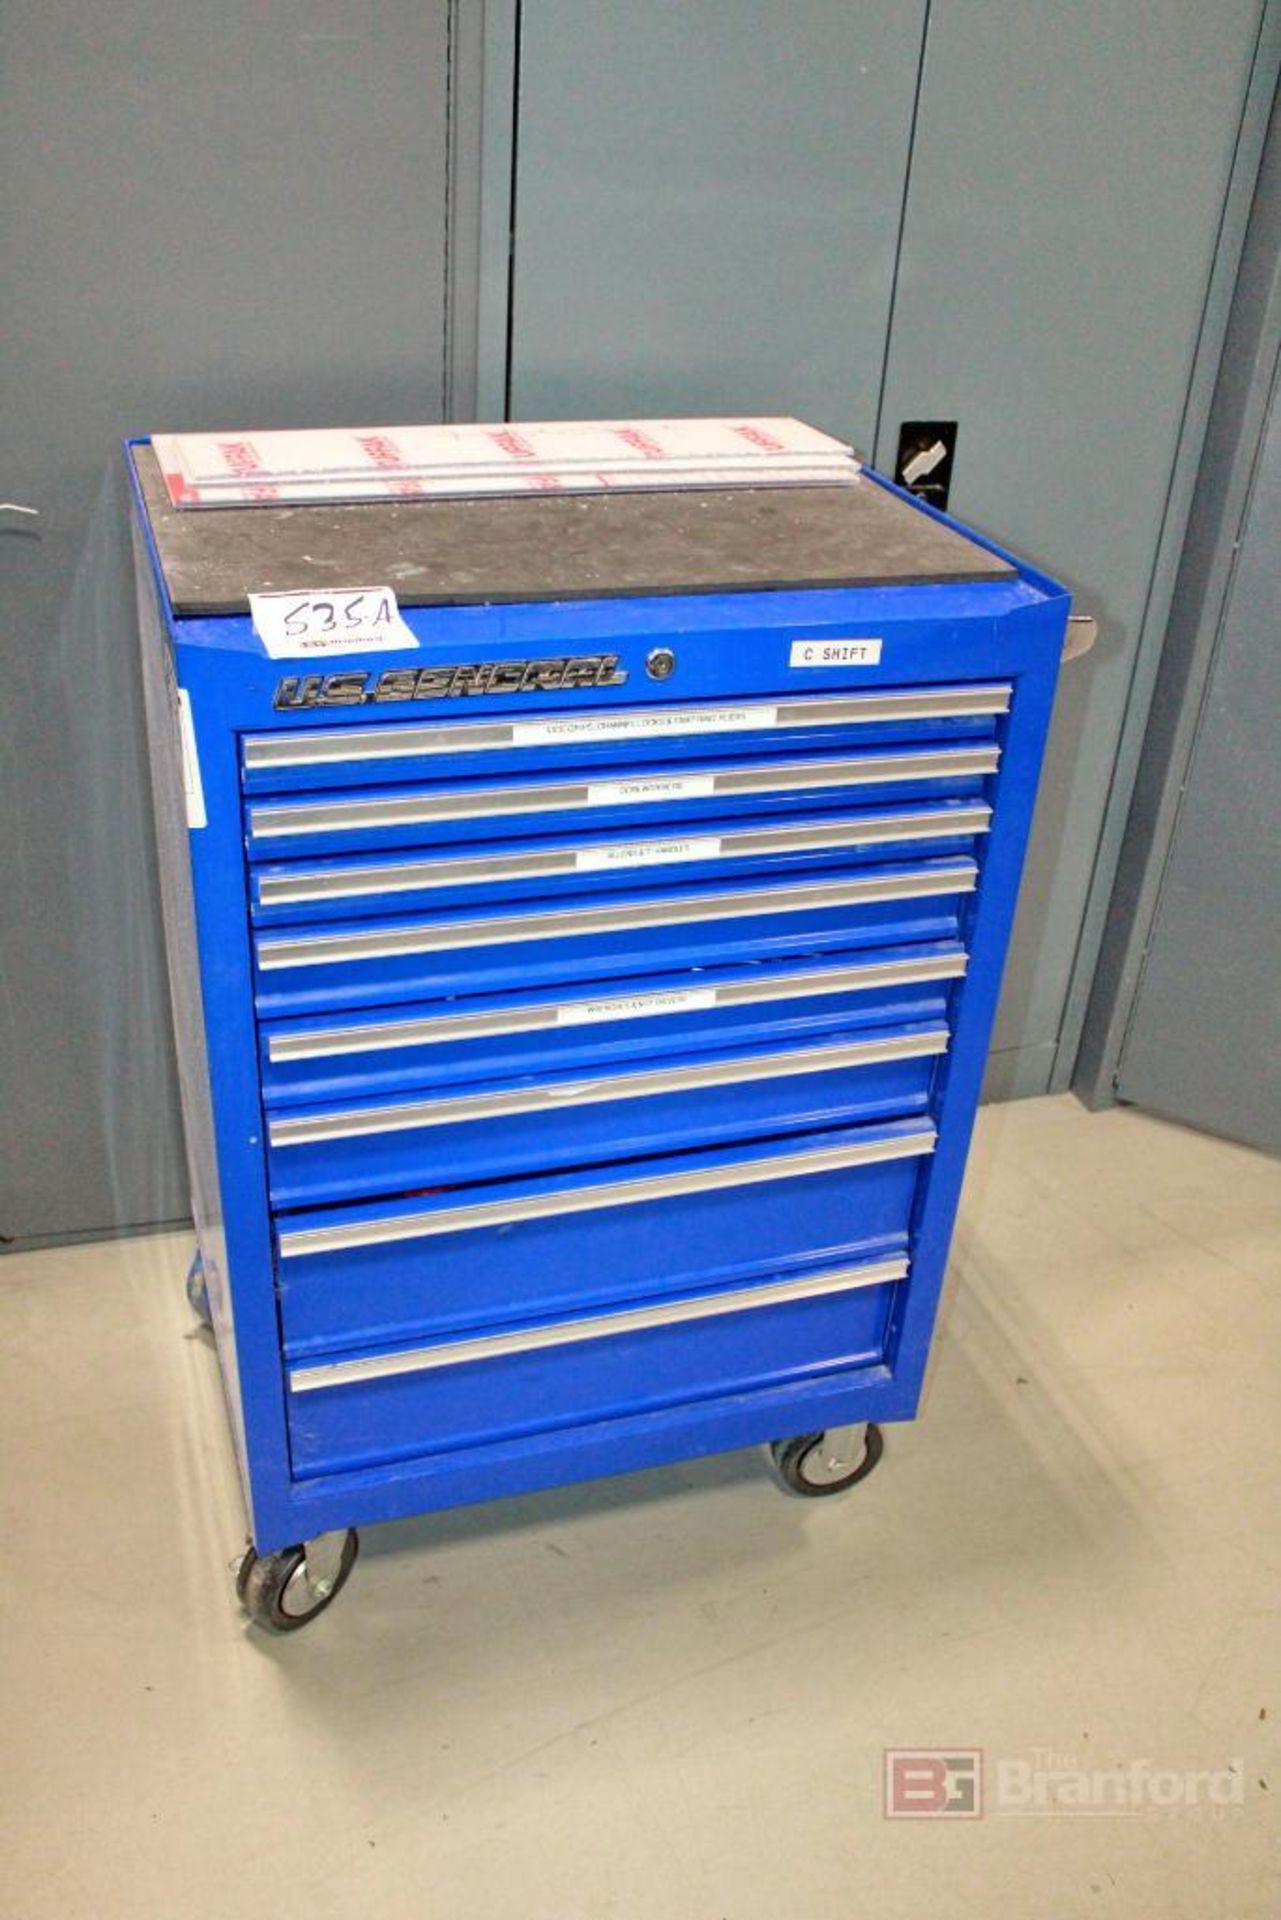 8-Drawer Rolling Tool Chest, U.S. General